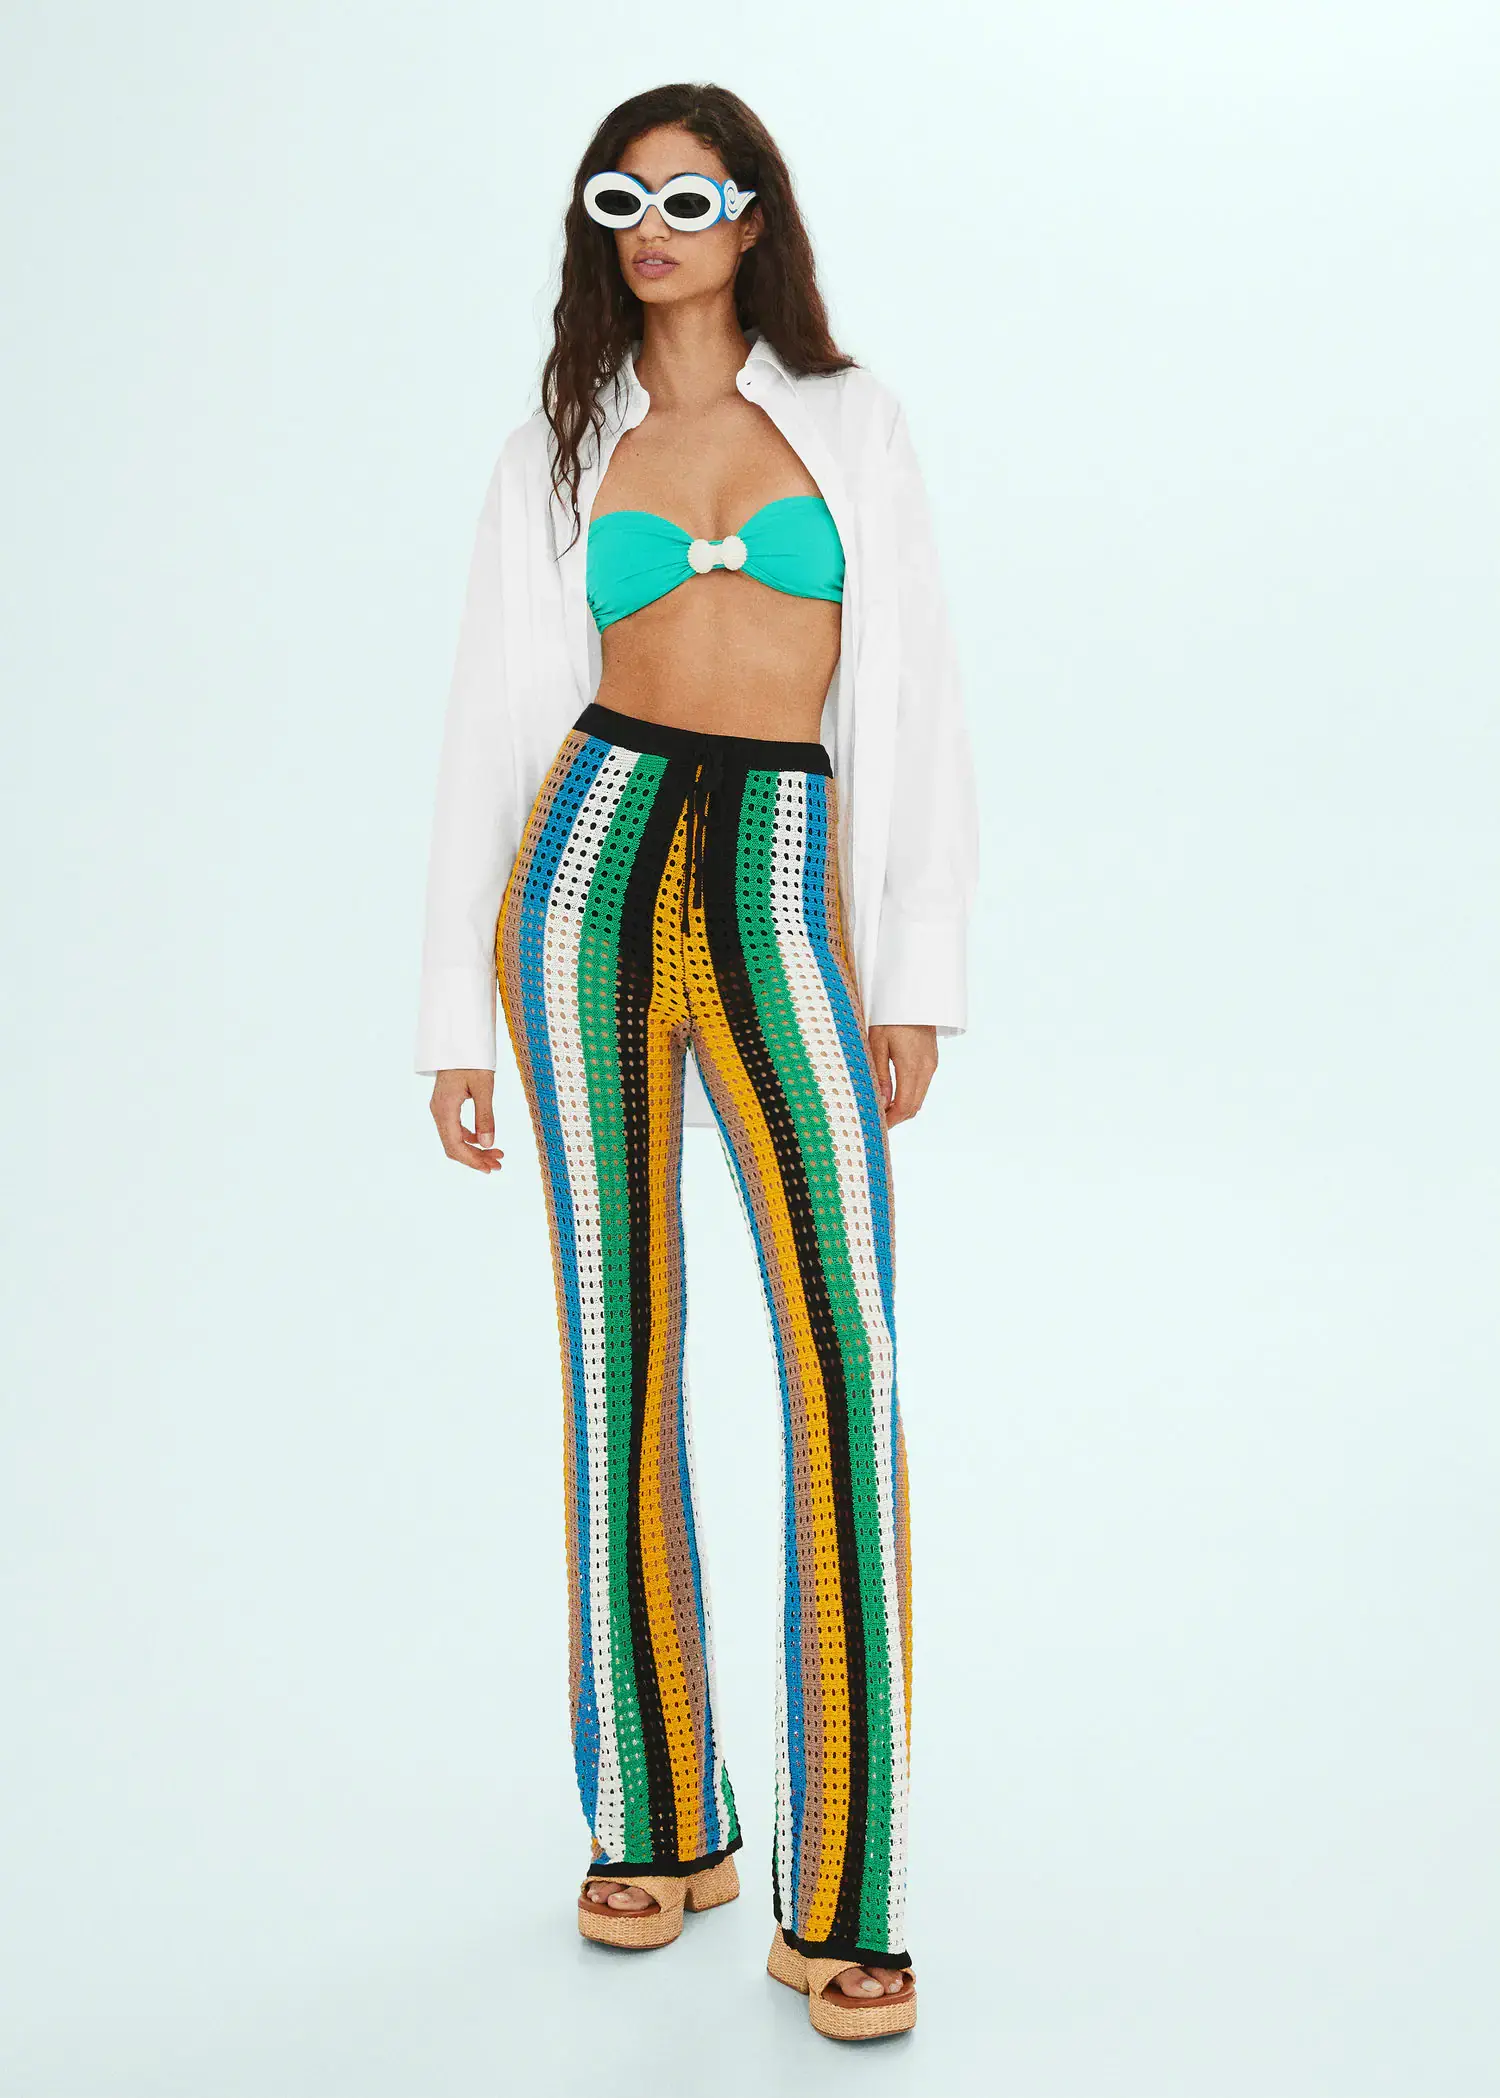 Mango Openwork knit pants. a woman wearing a white jacket and a colorful outfit. 